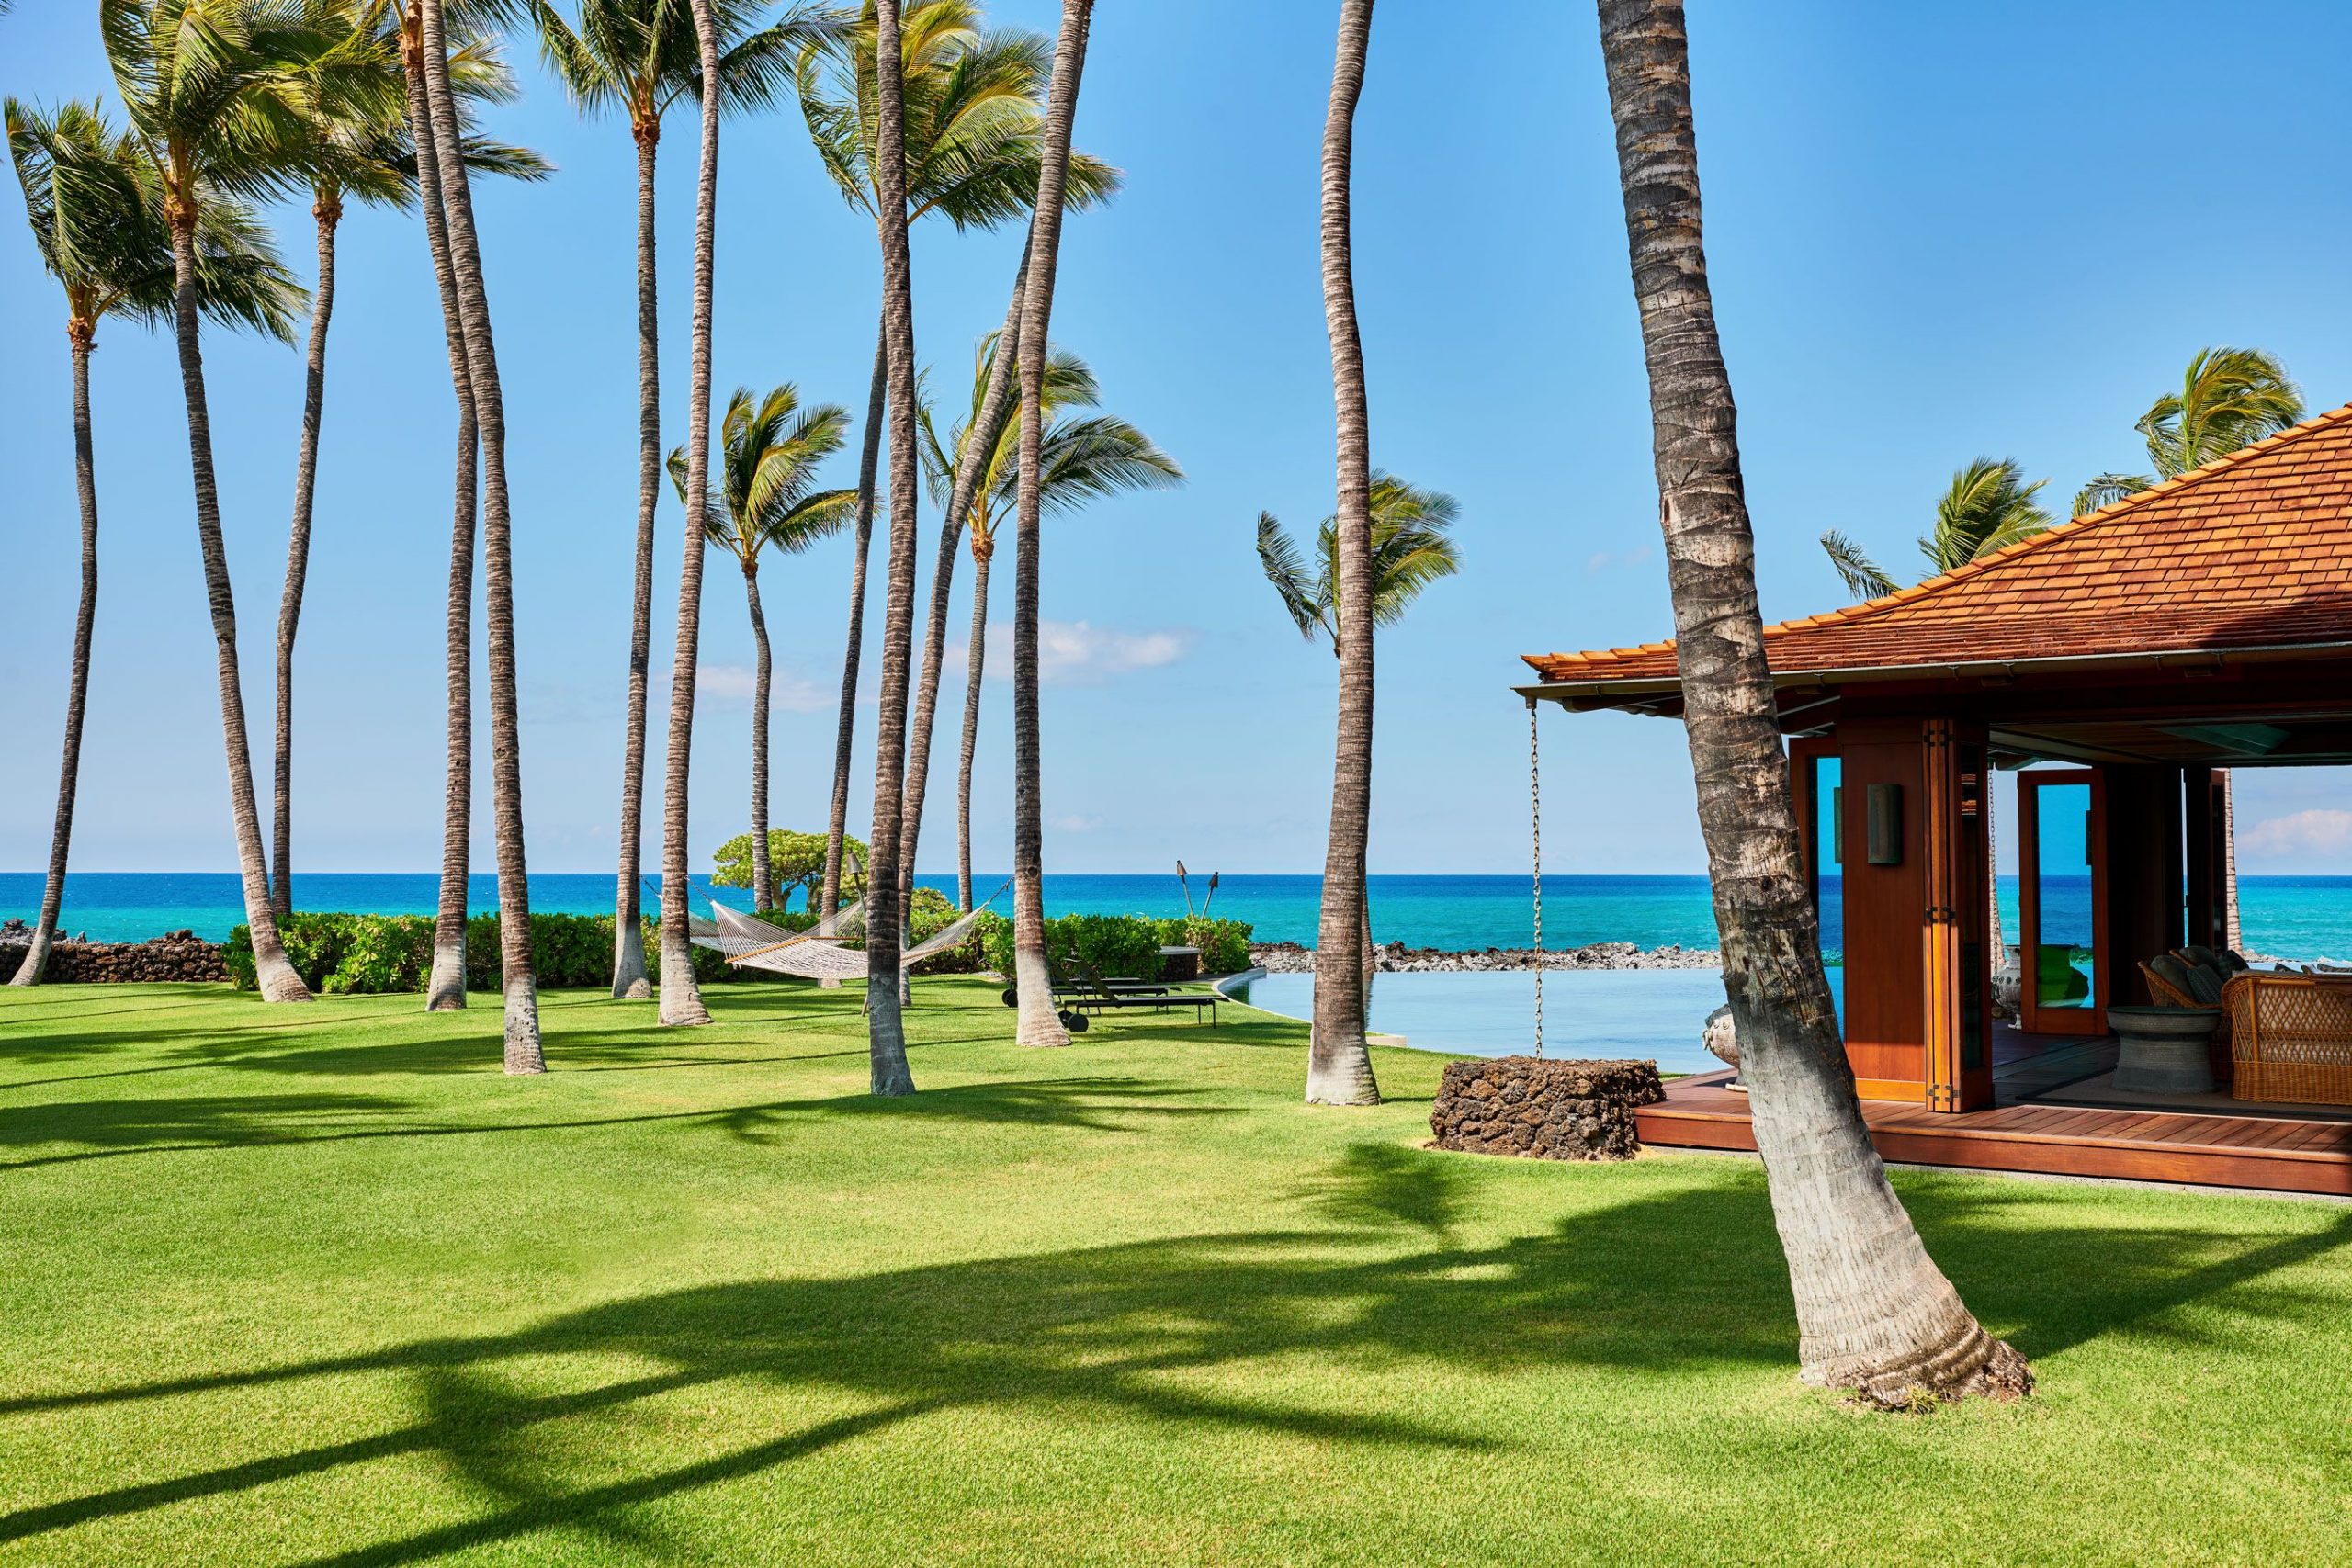 Why You Might Want To Invest In The Kona Coast of Hawaii